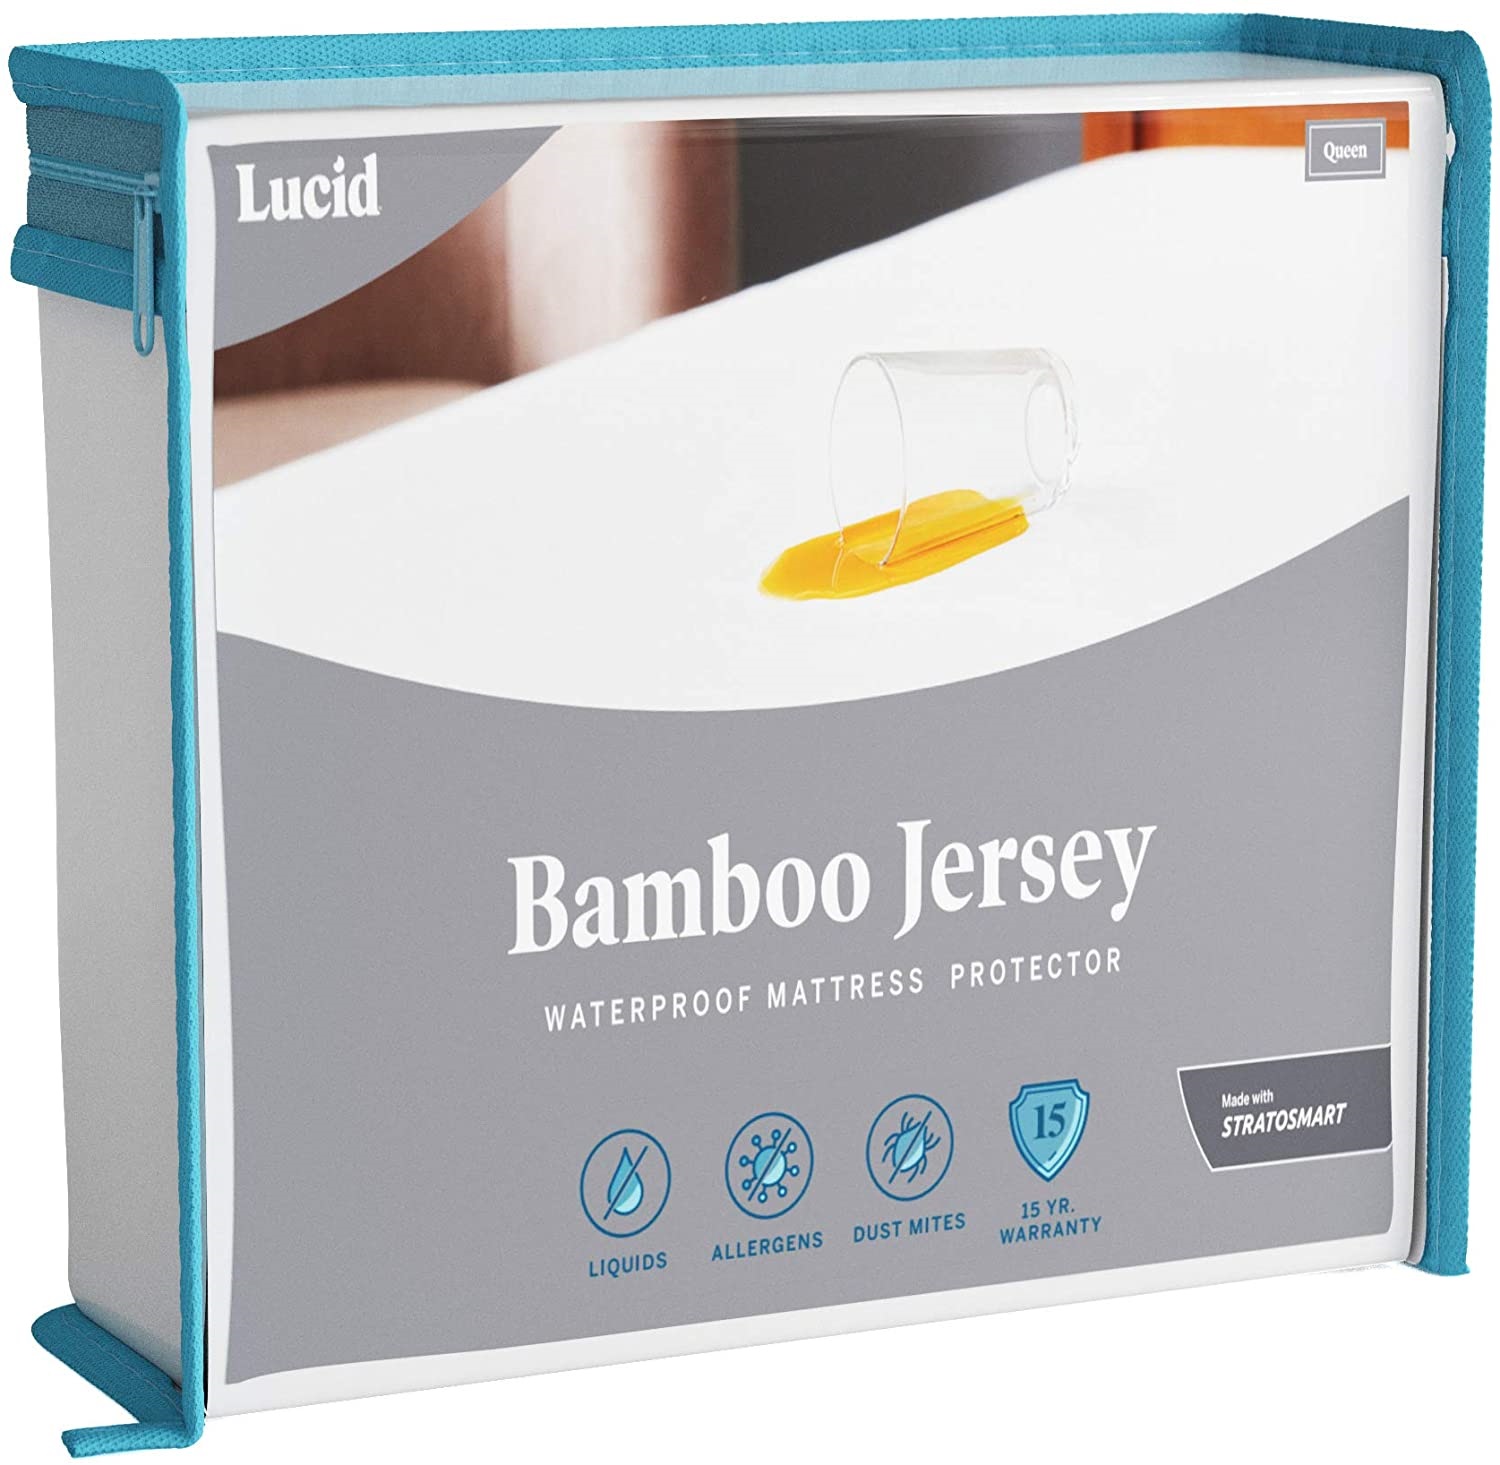 LUCID Bamboo Jersey